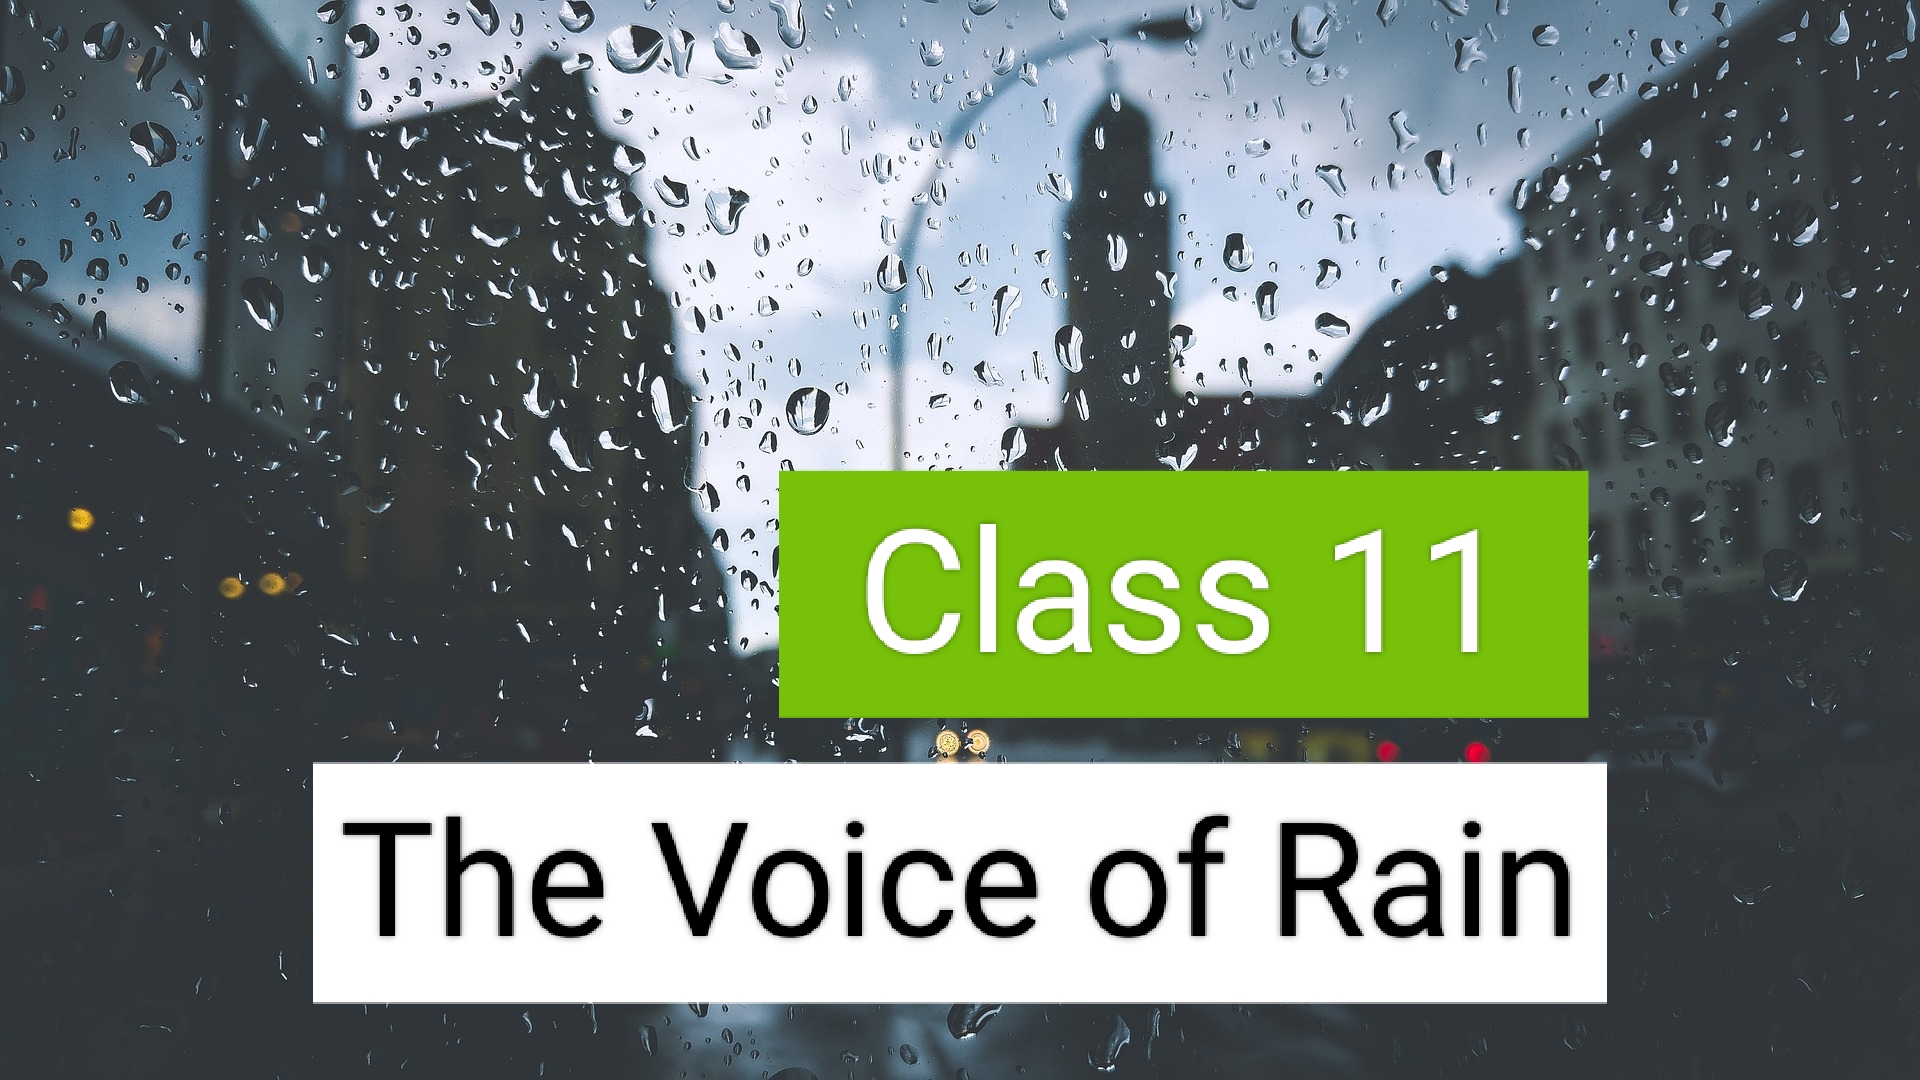 The voice of the rain